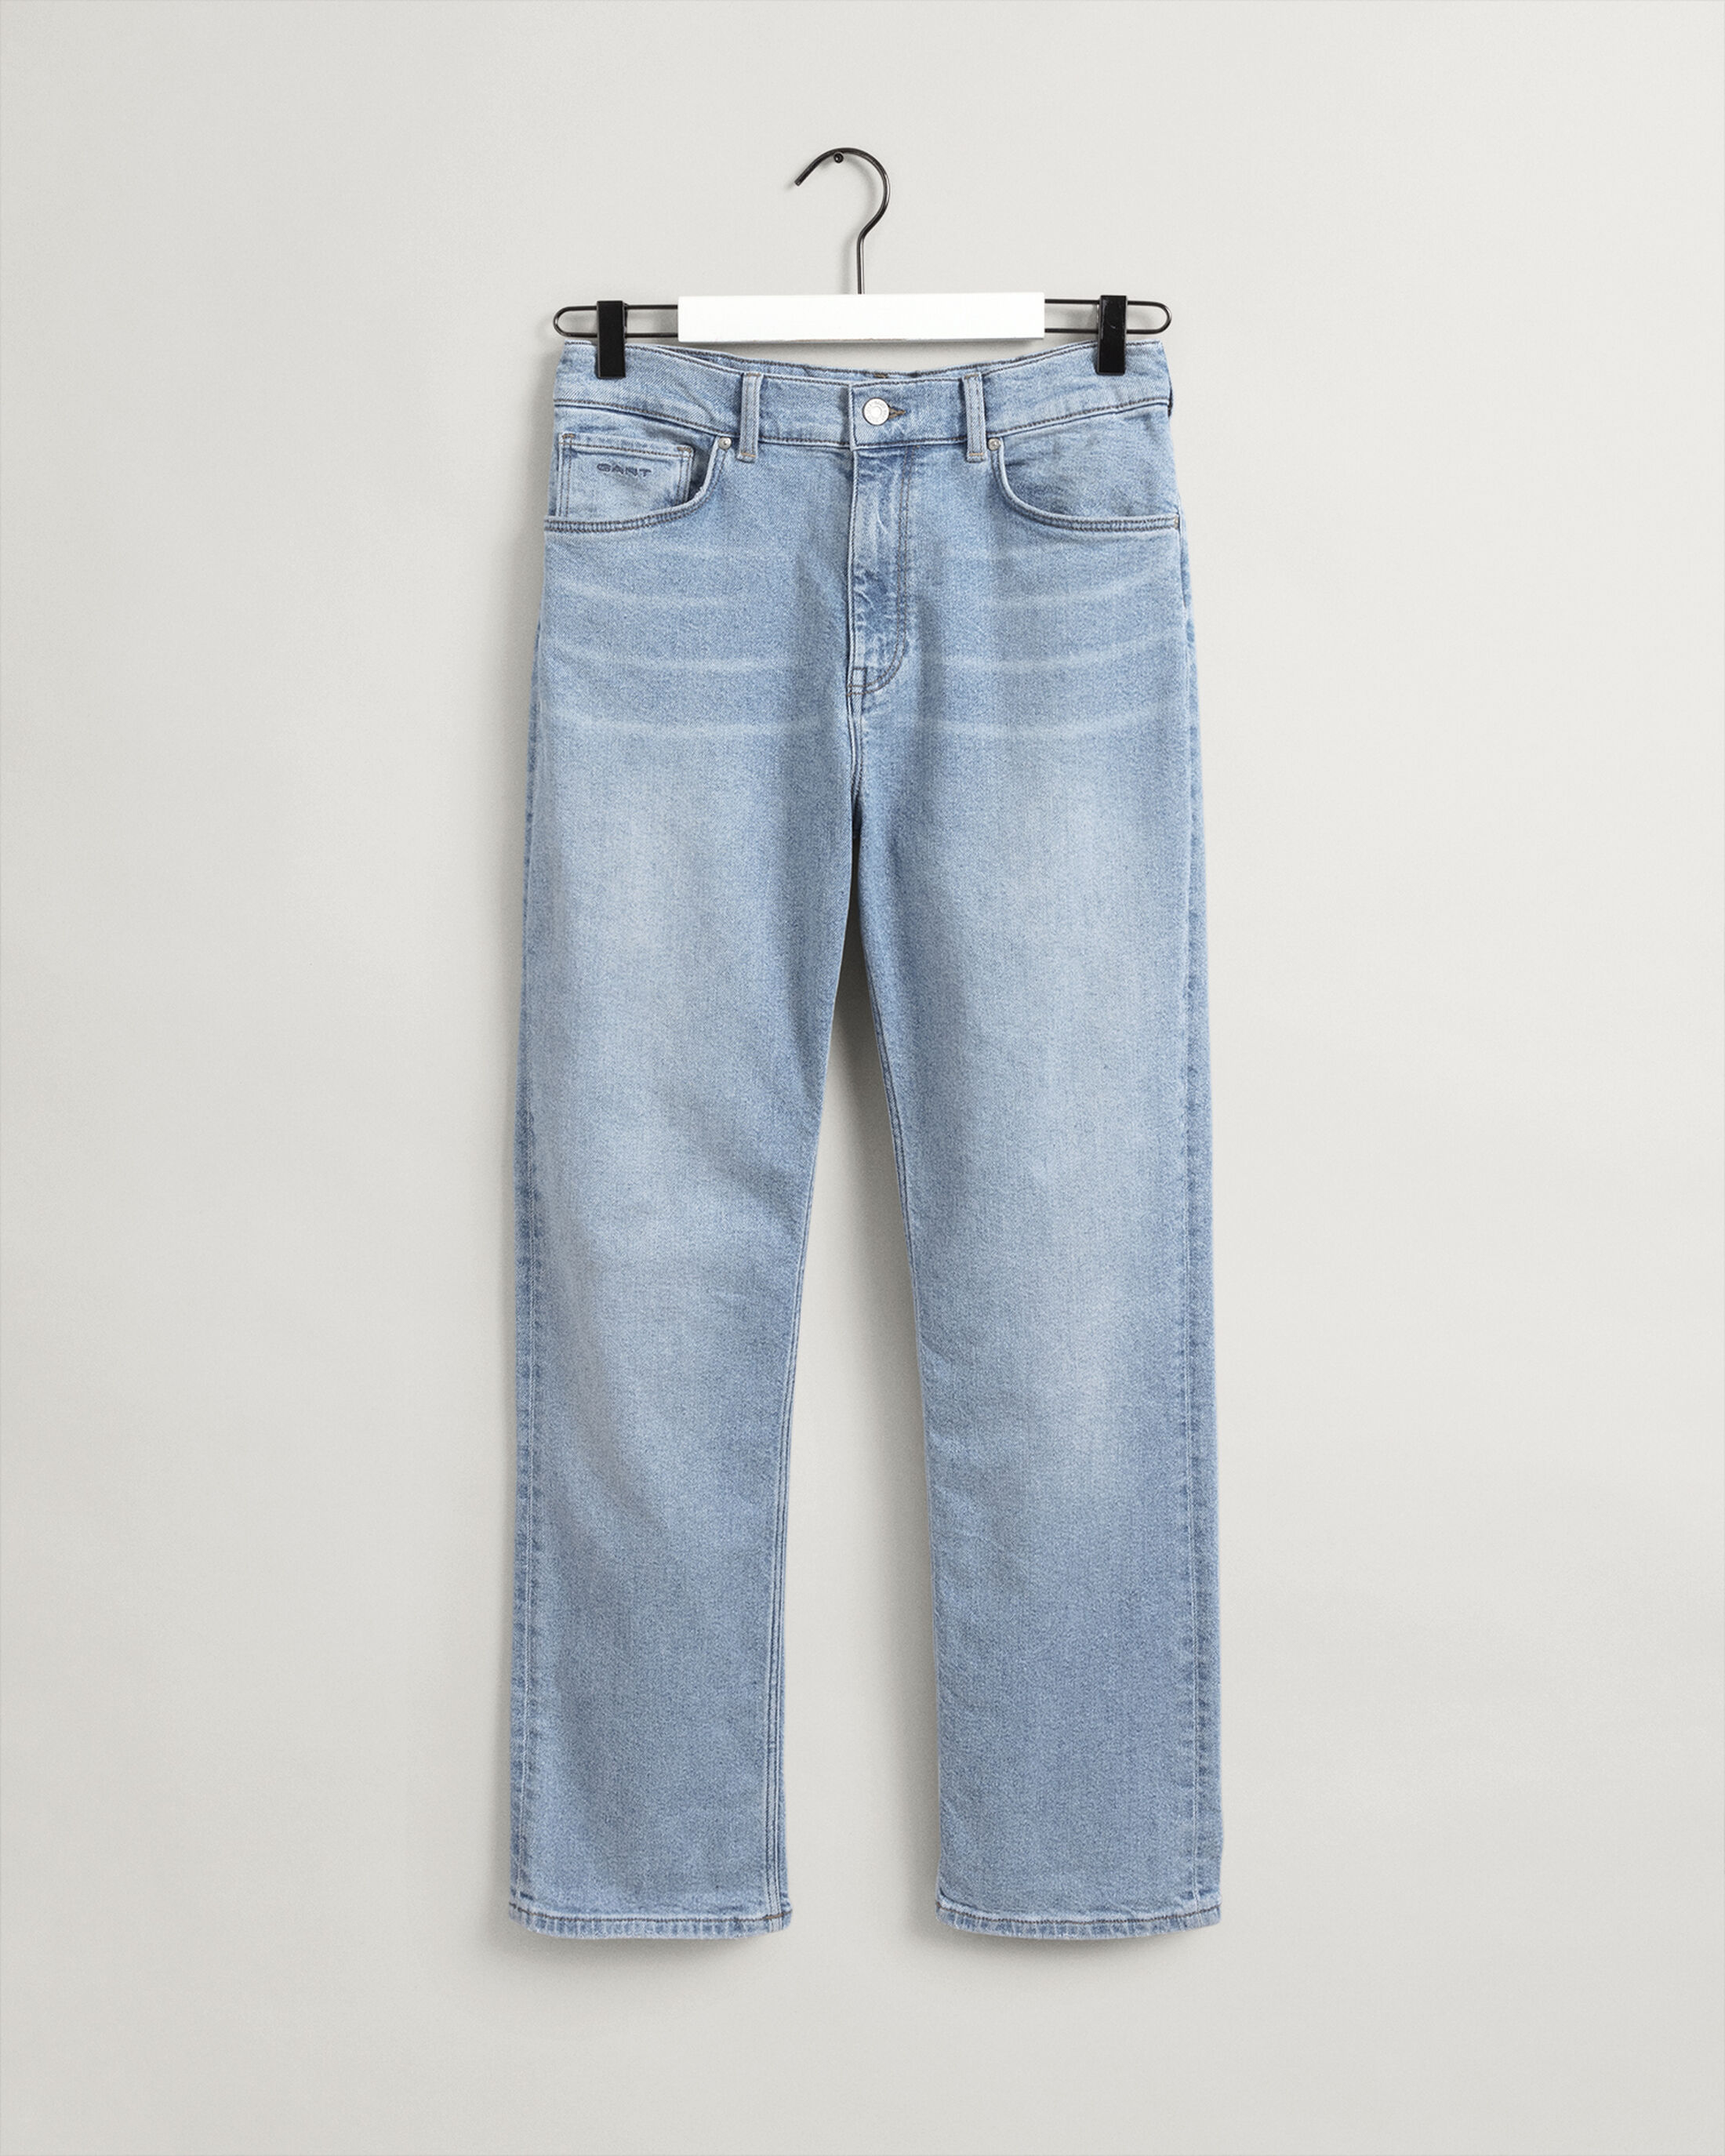  Teen Boys Relaxed Fit Jeans 